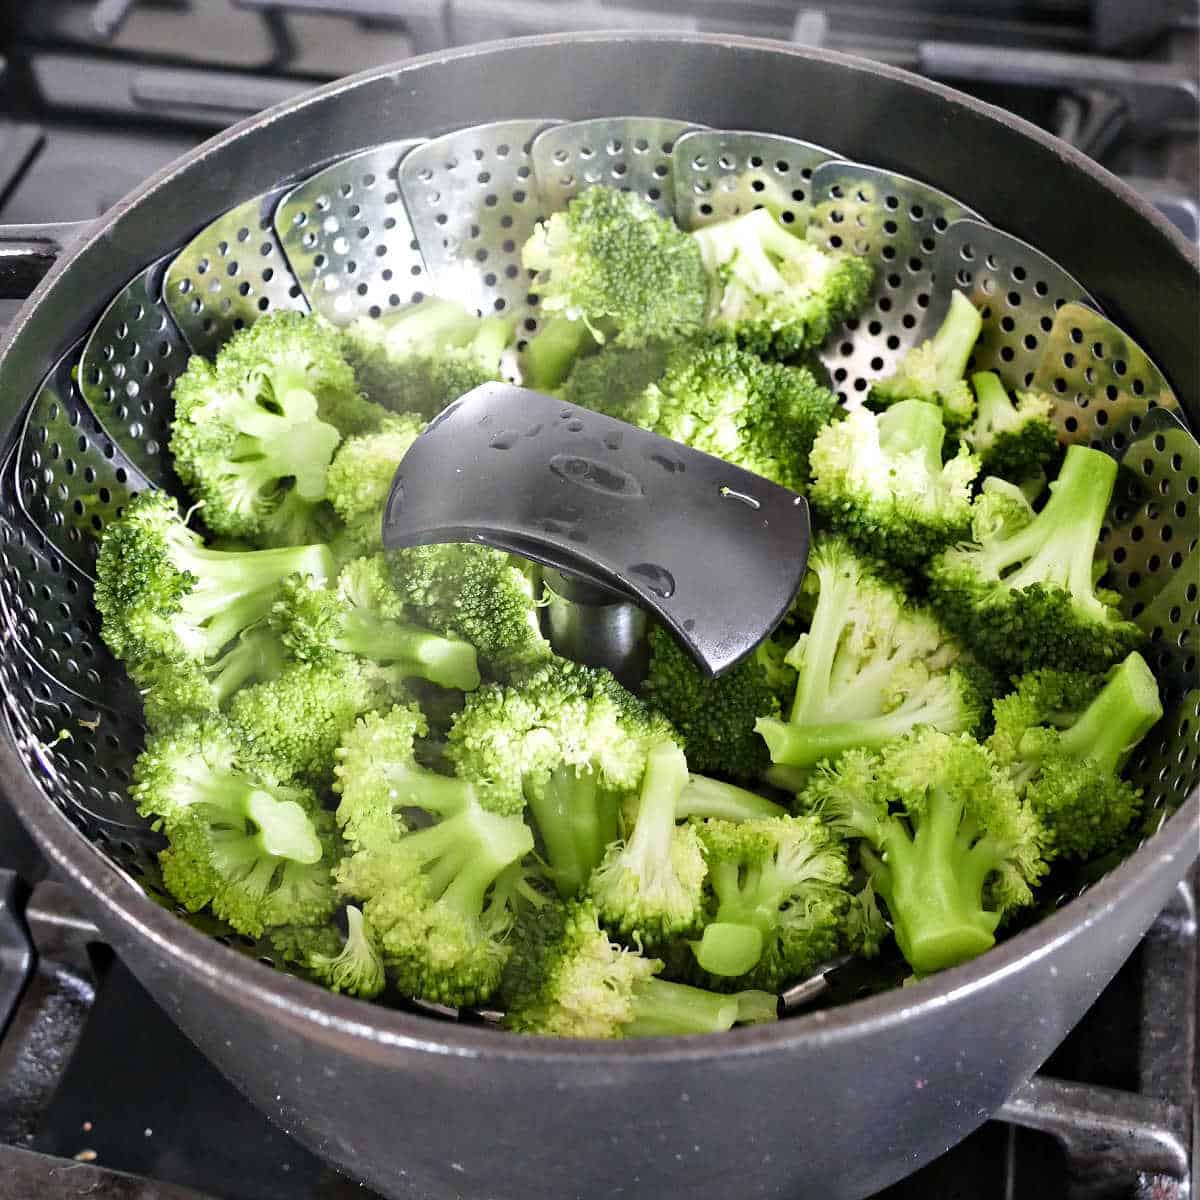 broccoli florets cooking in a vegetable steamer basket in a pot on a stove